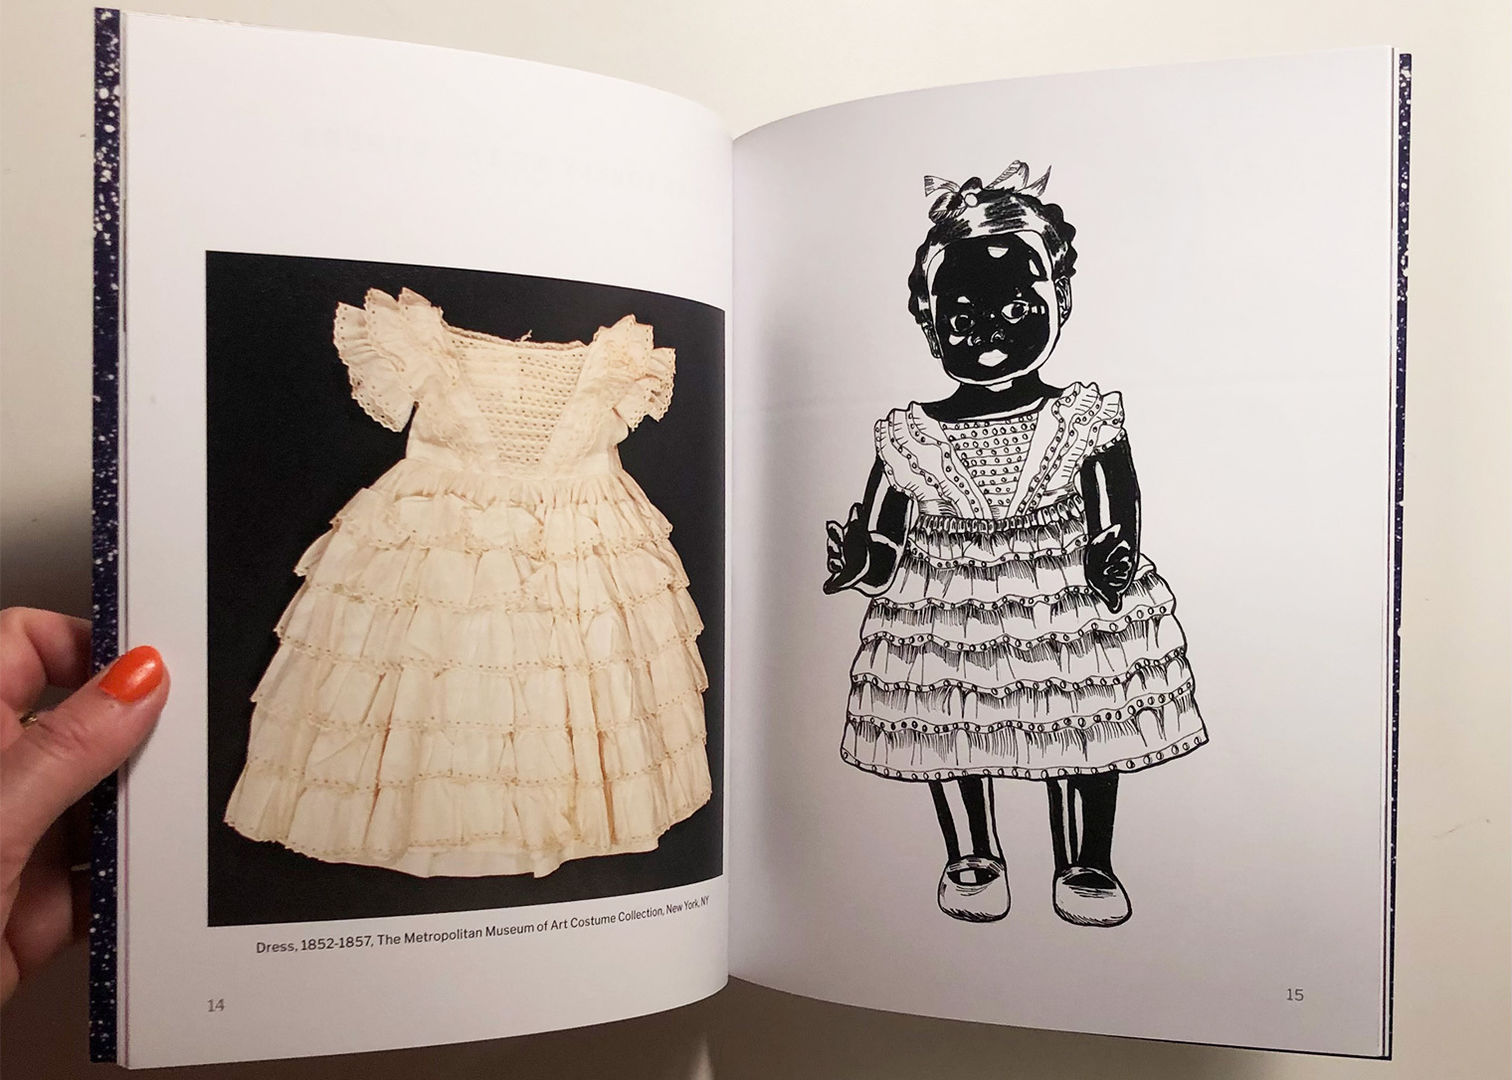 A book depicting a young Black girl in a white dress